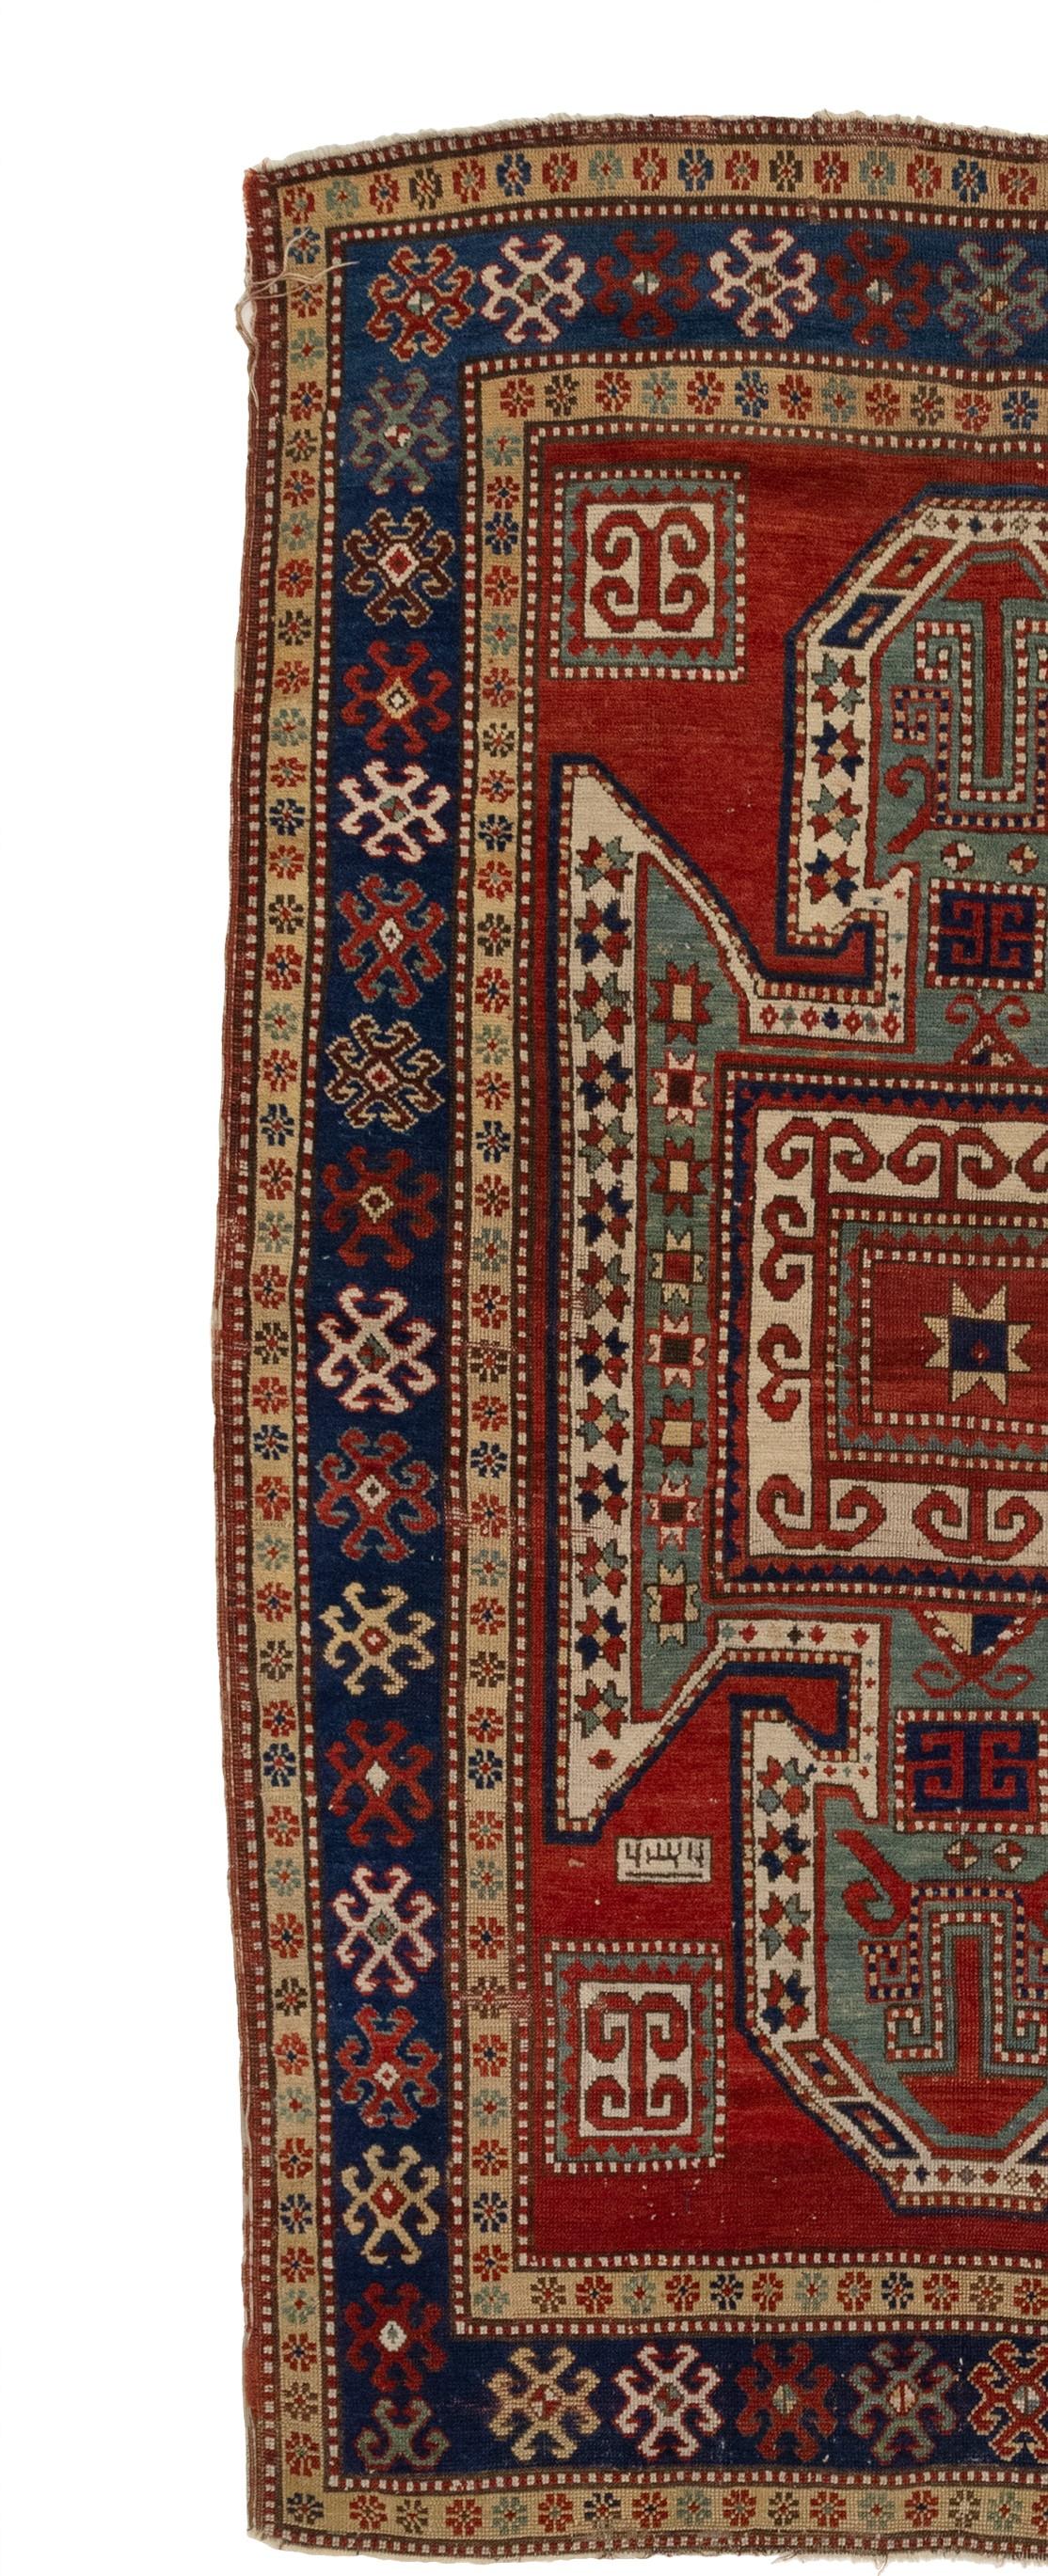 This magnificent carpet hails from the long-gone era of the 1880s, belonging to the category of antique Caucasian Kazak carpets. Its intricate details are a marvel to behold, unveiling more and more layers of beauty with each passing glance. The